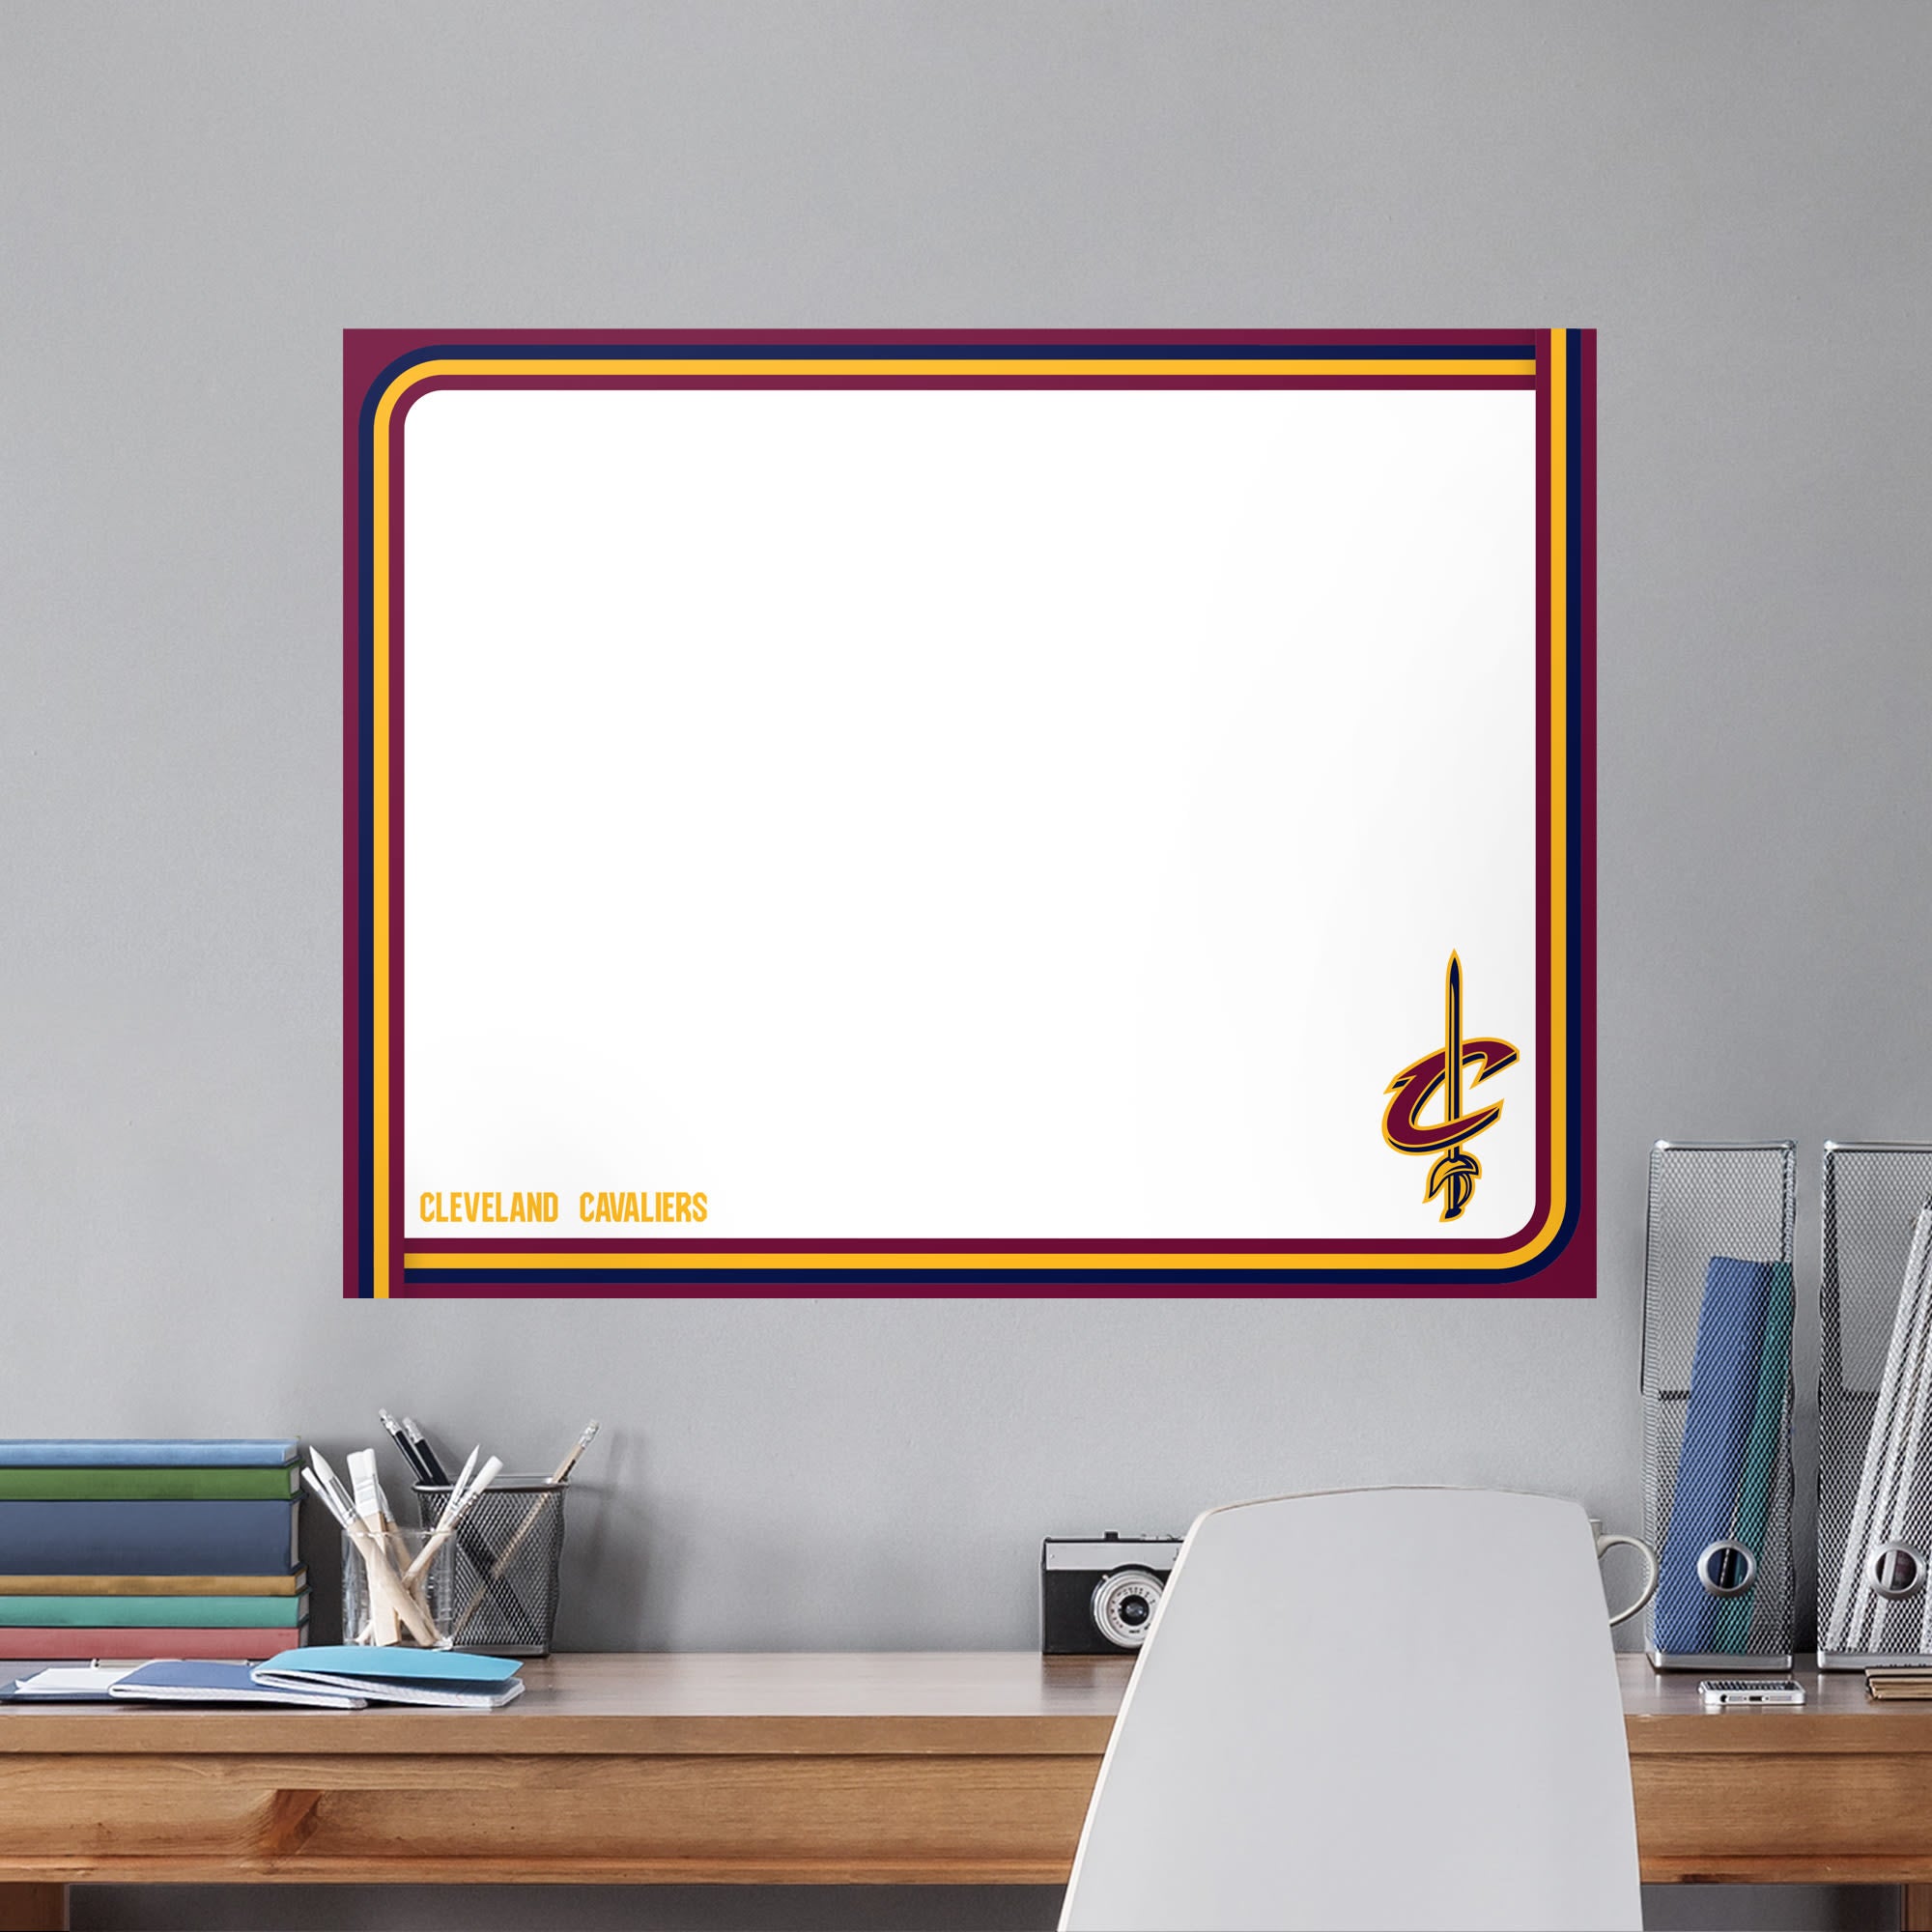 Cleveland Cavaliers for Cleveland Cavaliers: Dry Erase Whiteboard - Officially Licensed NBA Removable Wall Decal XL by Fathead |